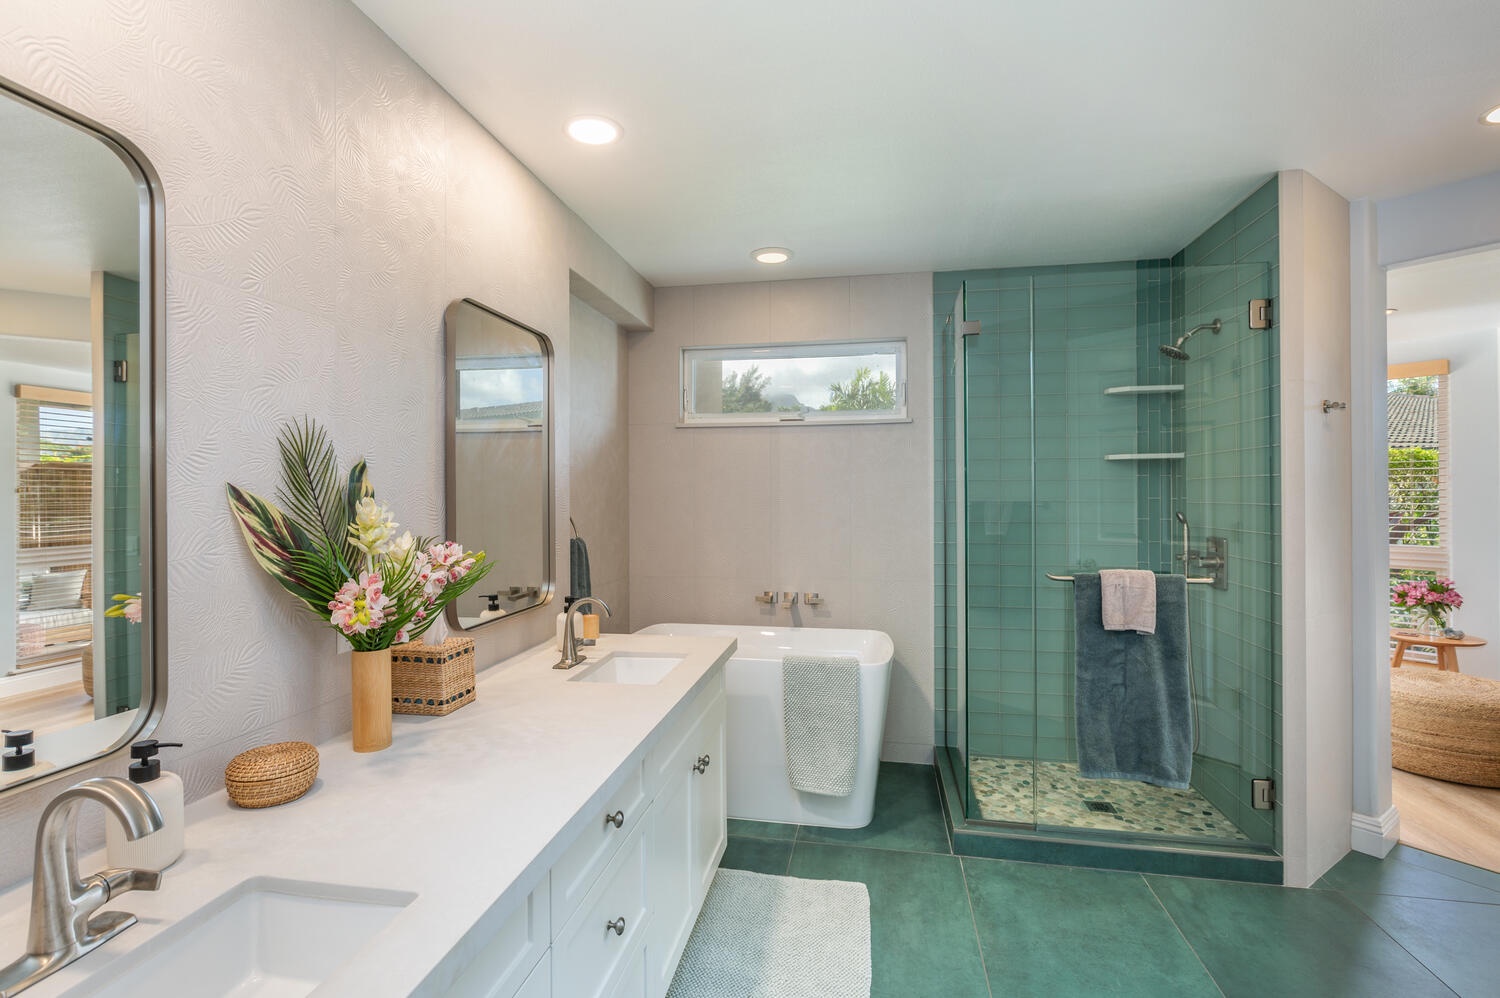 Princeville Vacation Rentals, Sea Glass - The ensuite bath with dual sinks, a soaking tub and a separate walk-in shower.